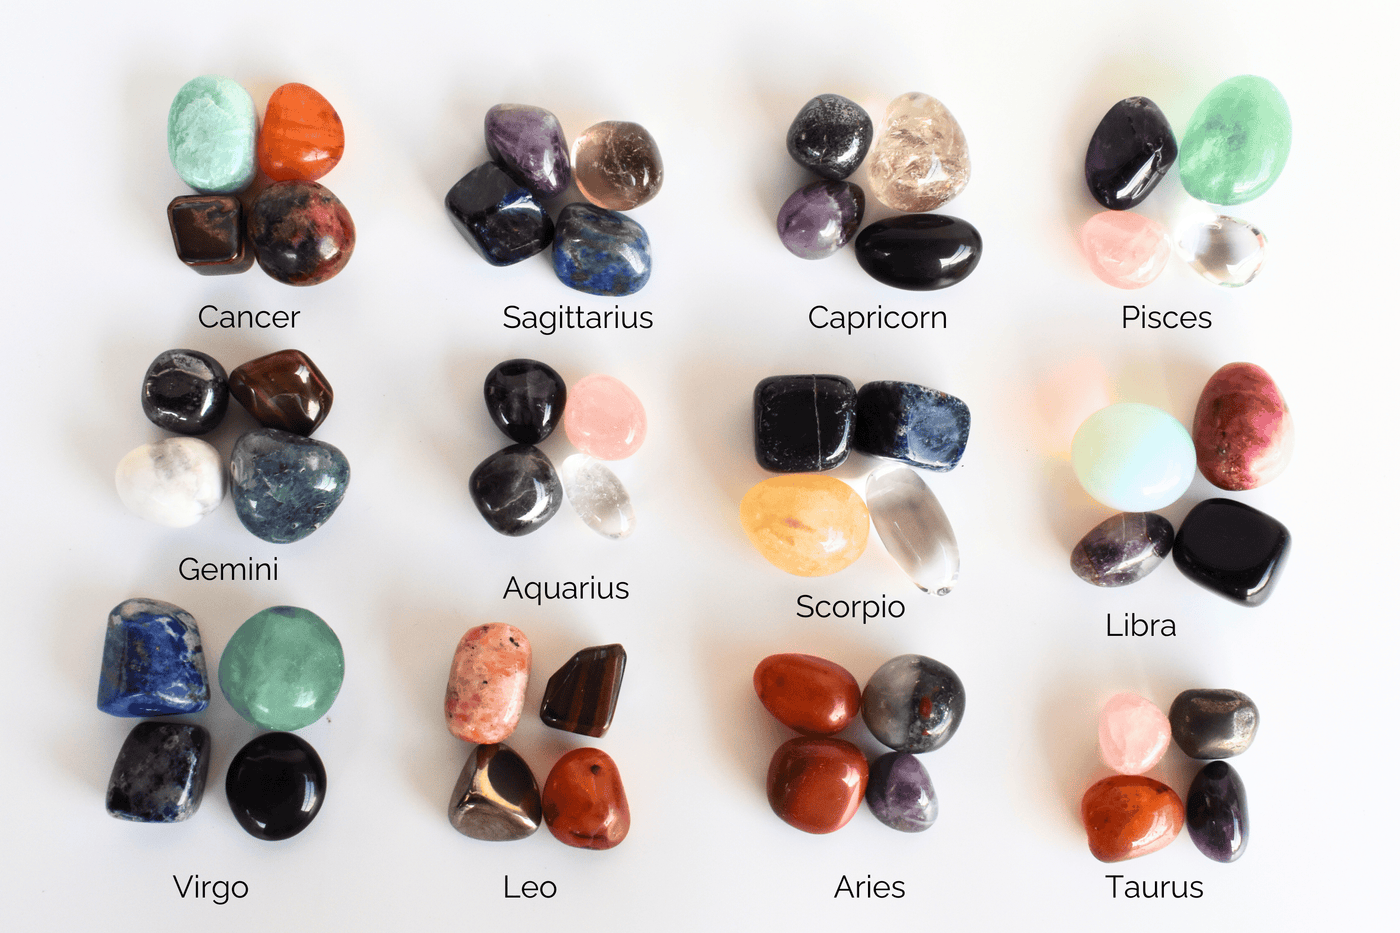 PISCES Zodiac Crystal Kit, Pisces Birthstones Tumbled Stones Set, Pisces Gifts